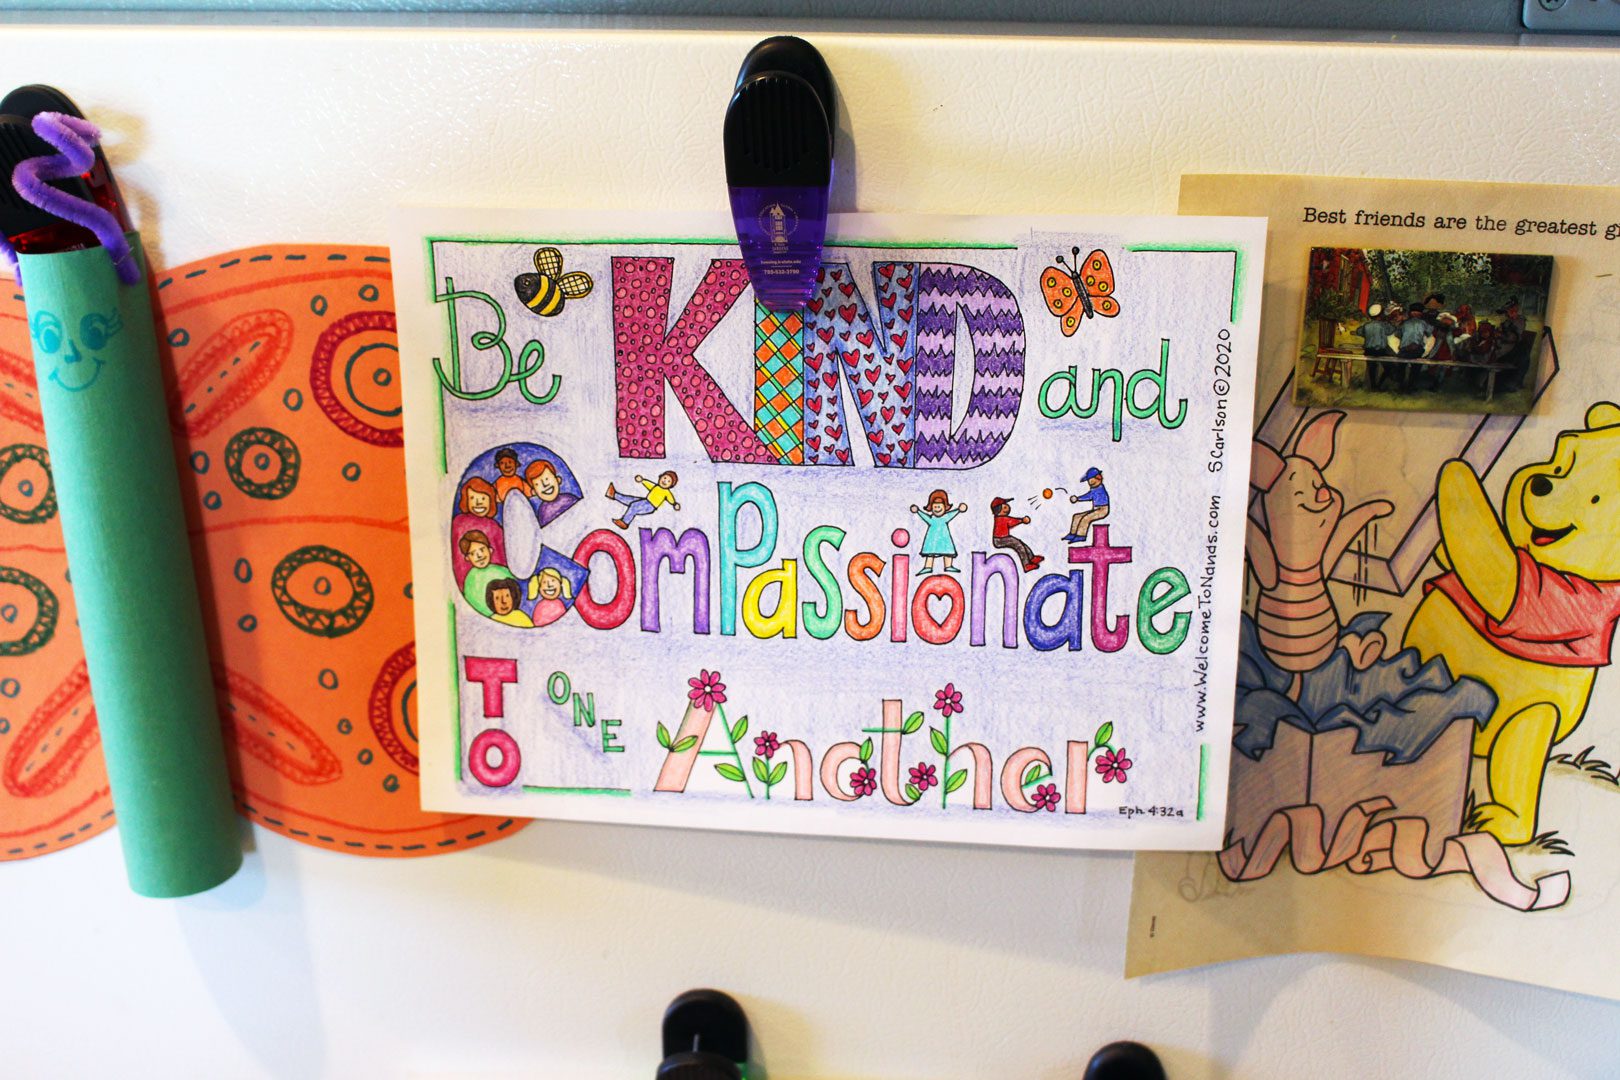 A coloring page with the words "Be Kind and Compassionate To one Another", colored by colored pencils, hanging on a refrigerator.